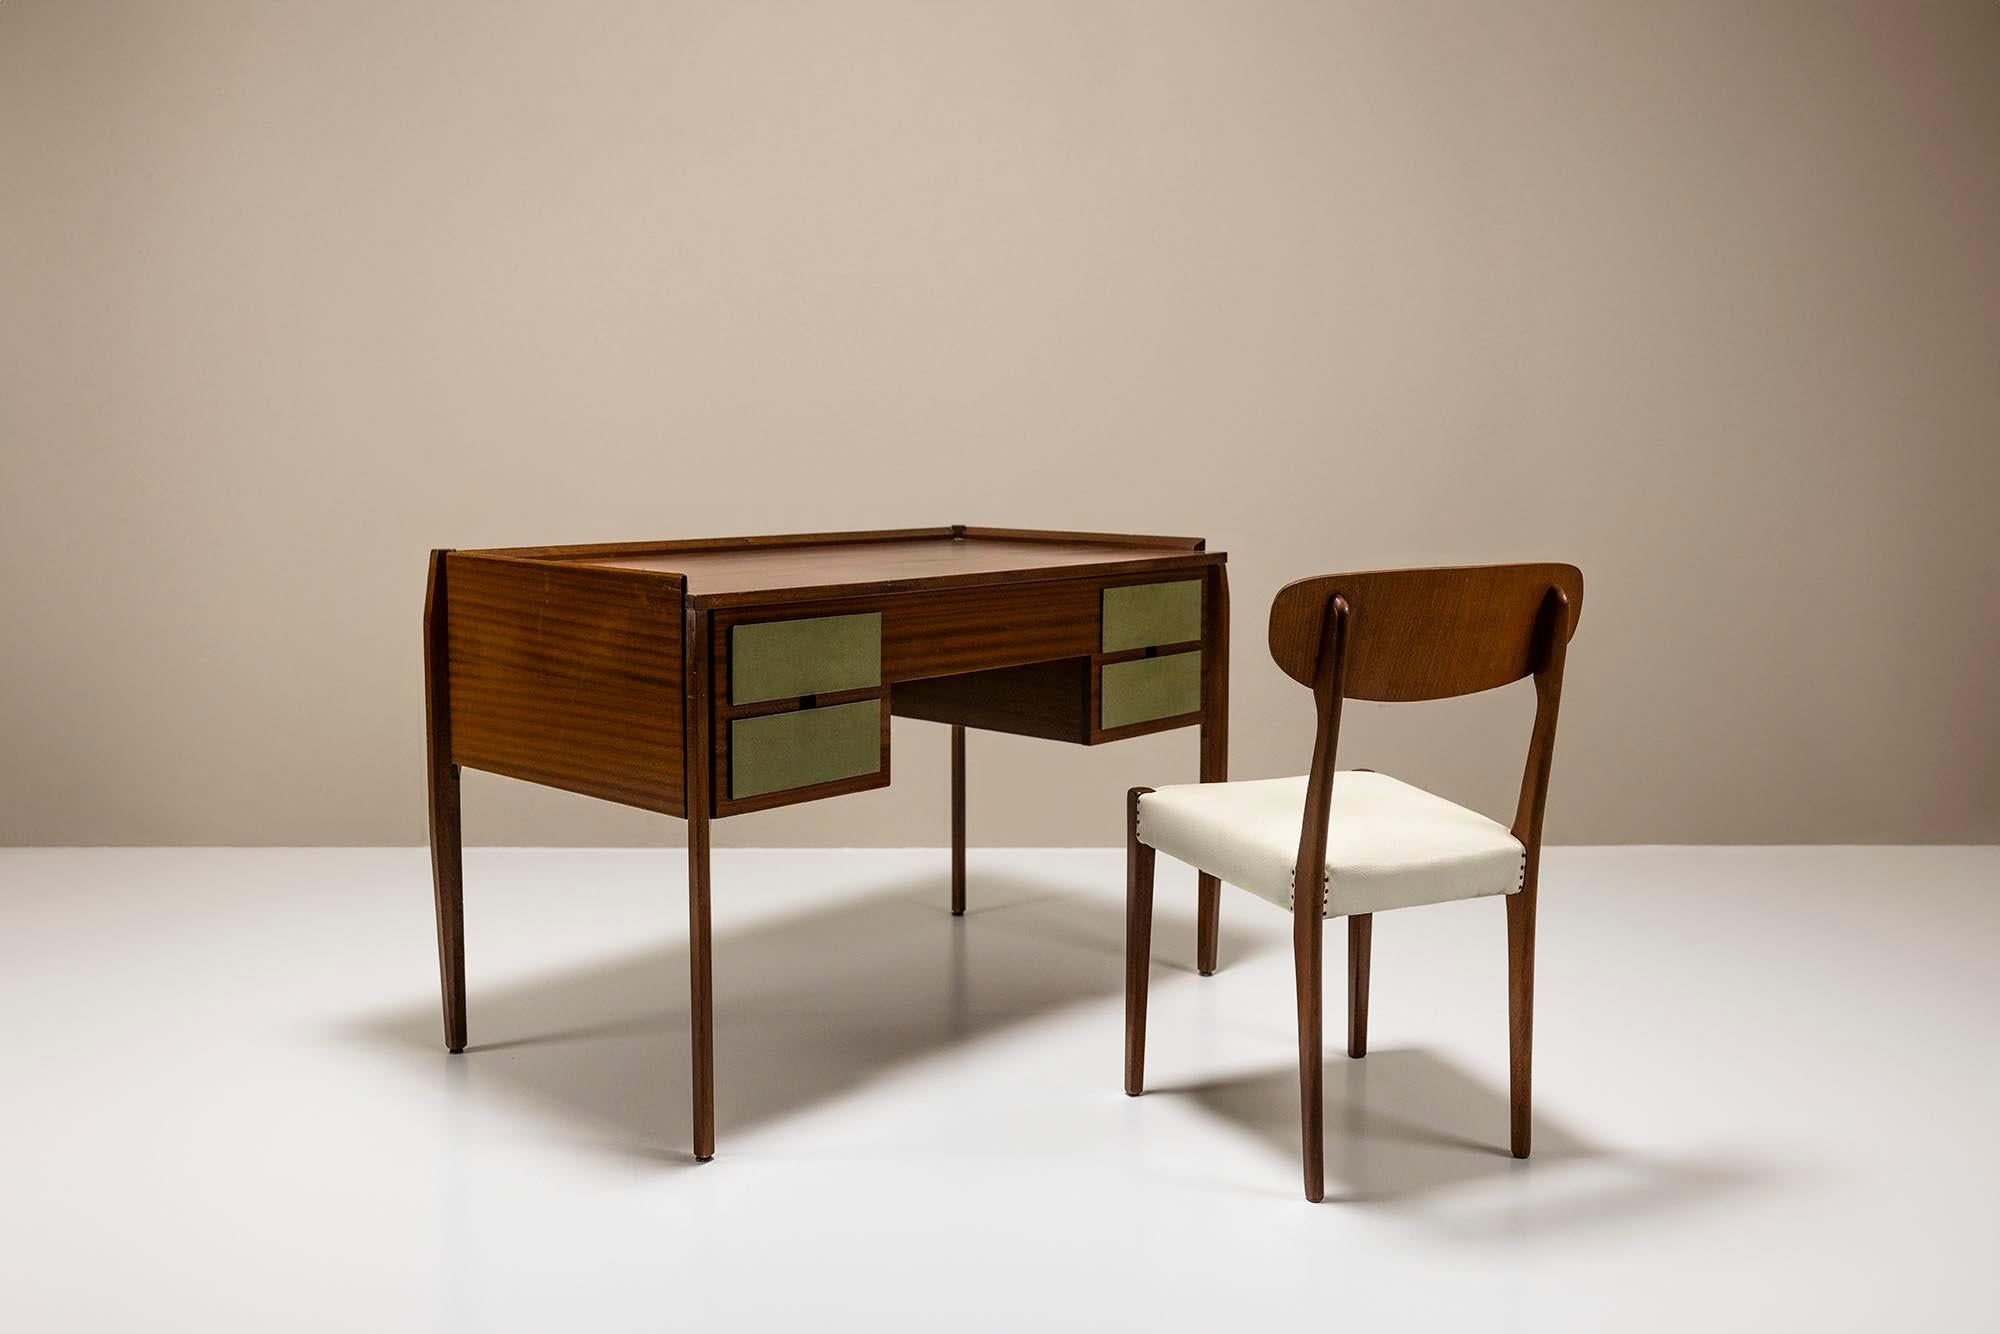 This desk is unassuming yet quietly captivating. Attributed to the renowned designer Gio Ponti, its elegant tapered legs draw the eye effortlessly. Veneered in rich mahogany, the desk exudes warmth and character, its surface adorned with a gentle